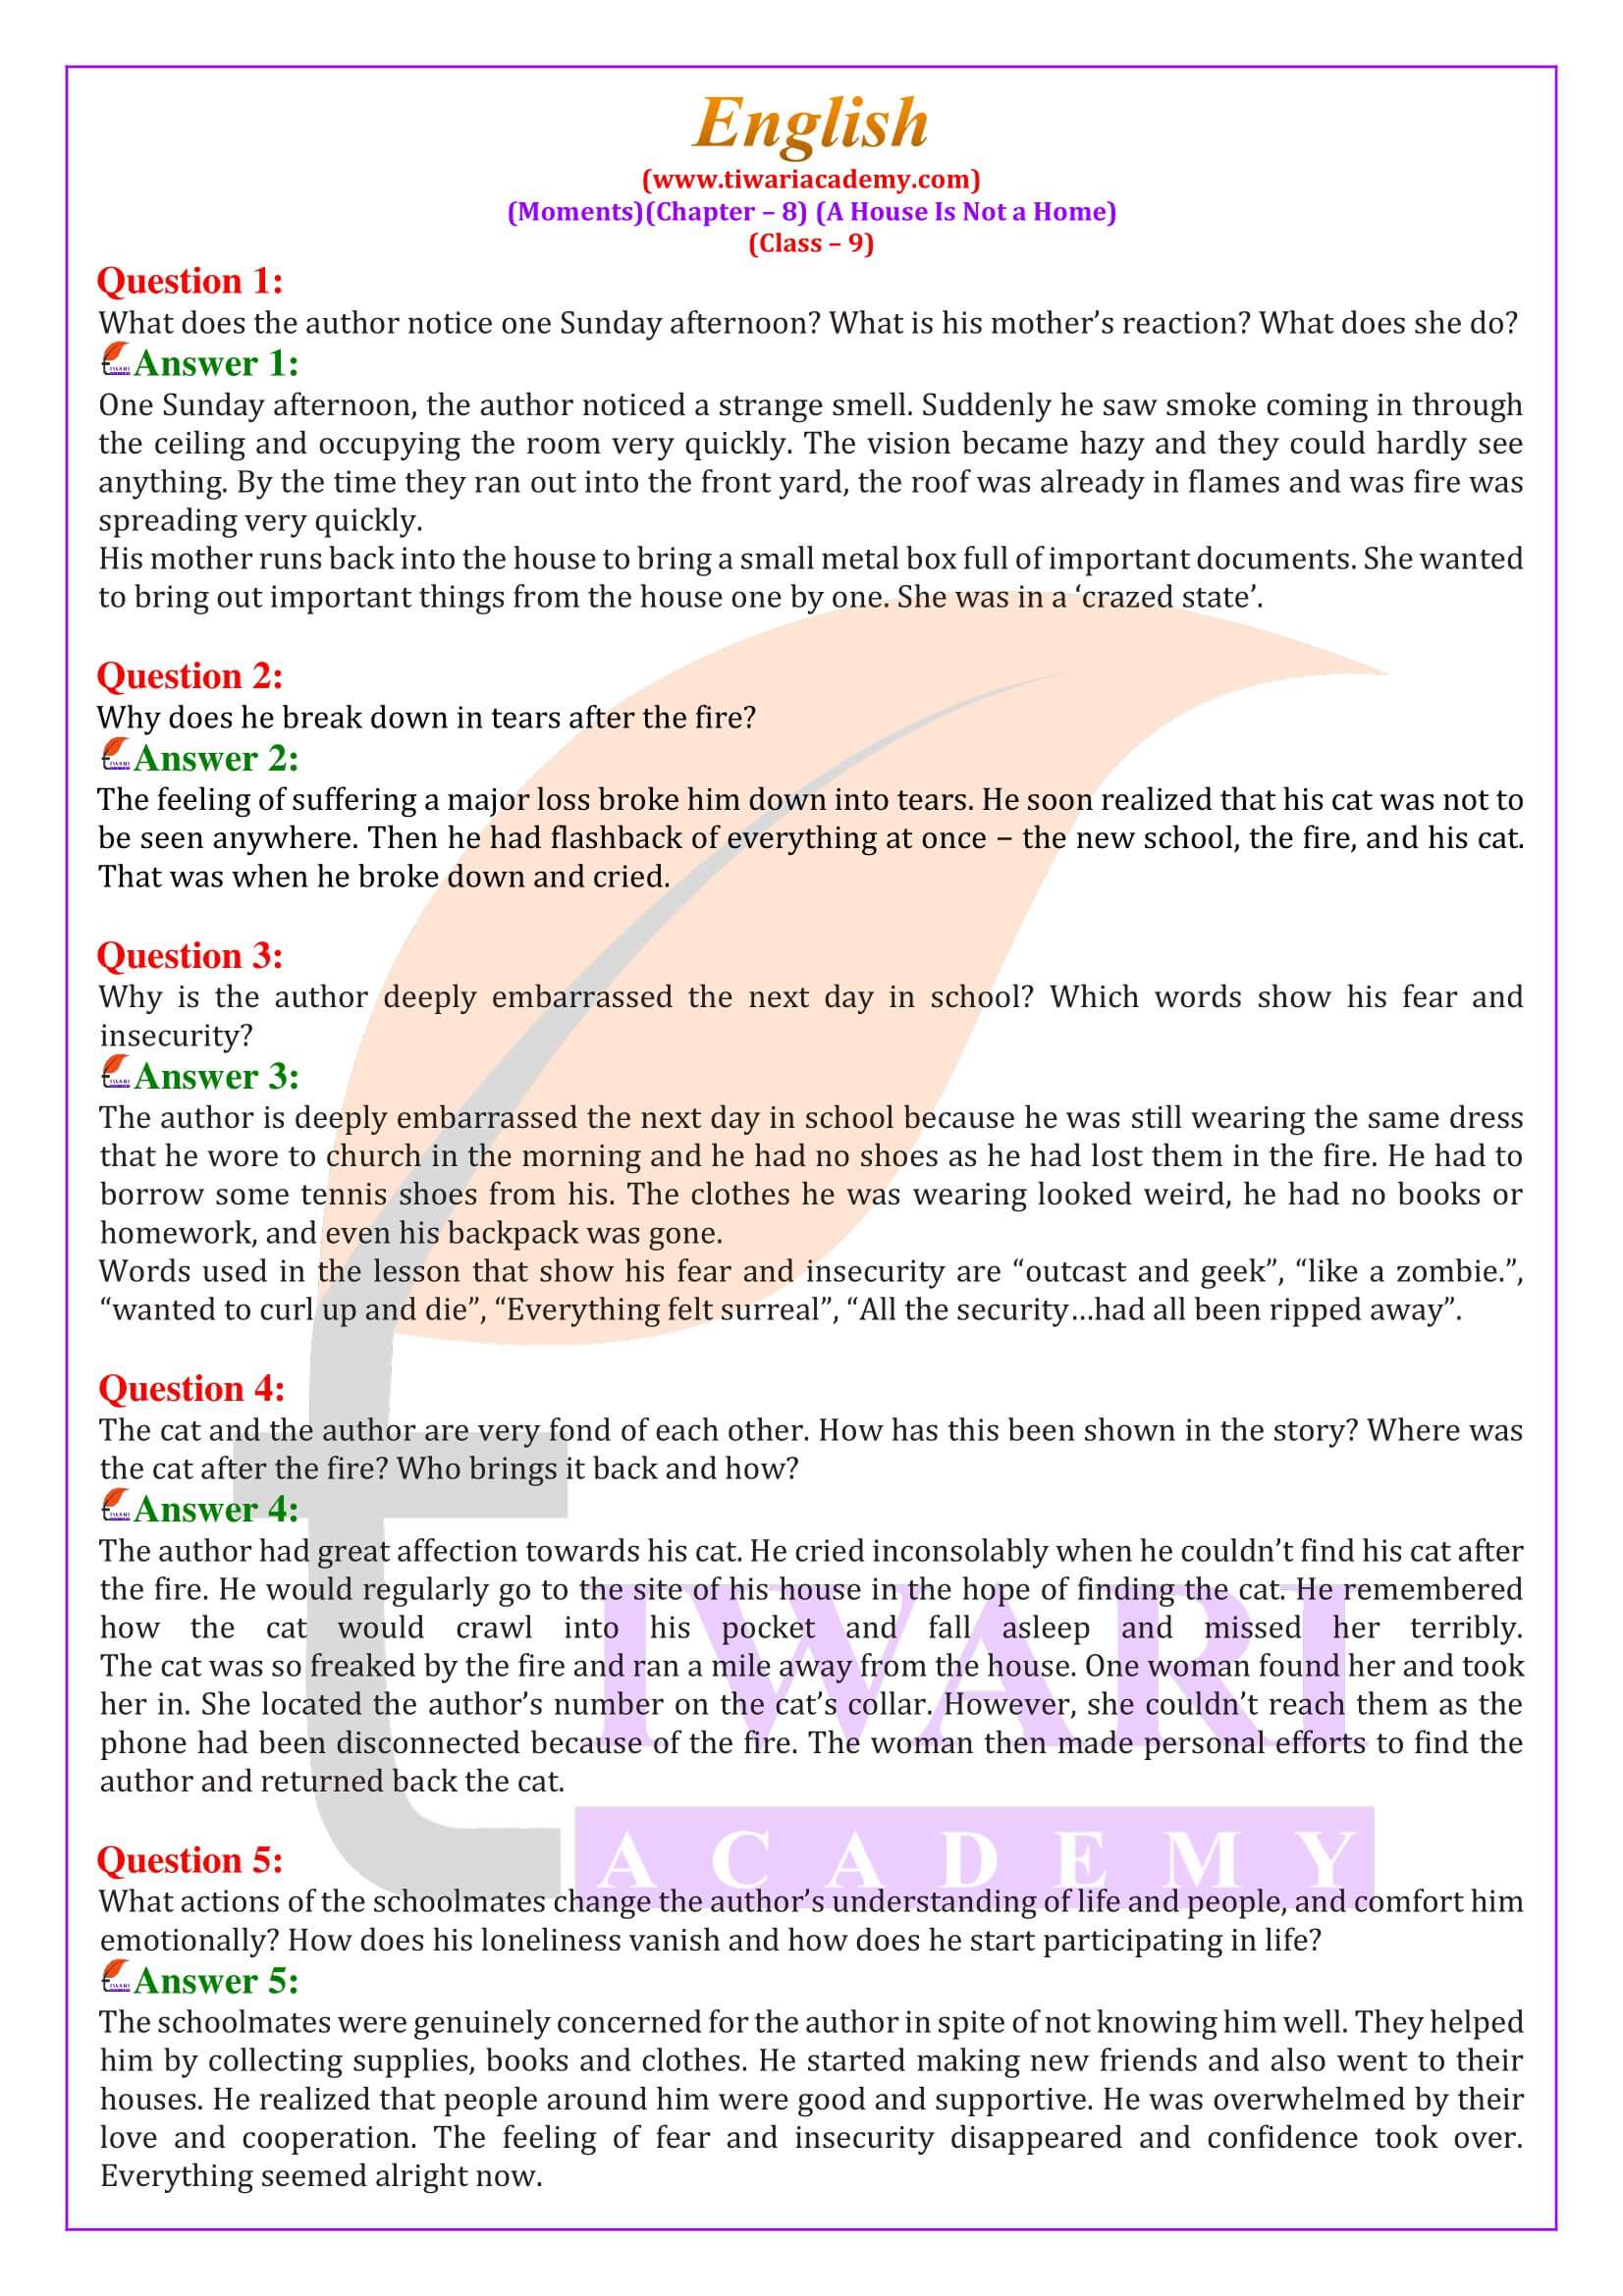 NCERT Solutions for Class 9 English Moments Chapter 8